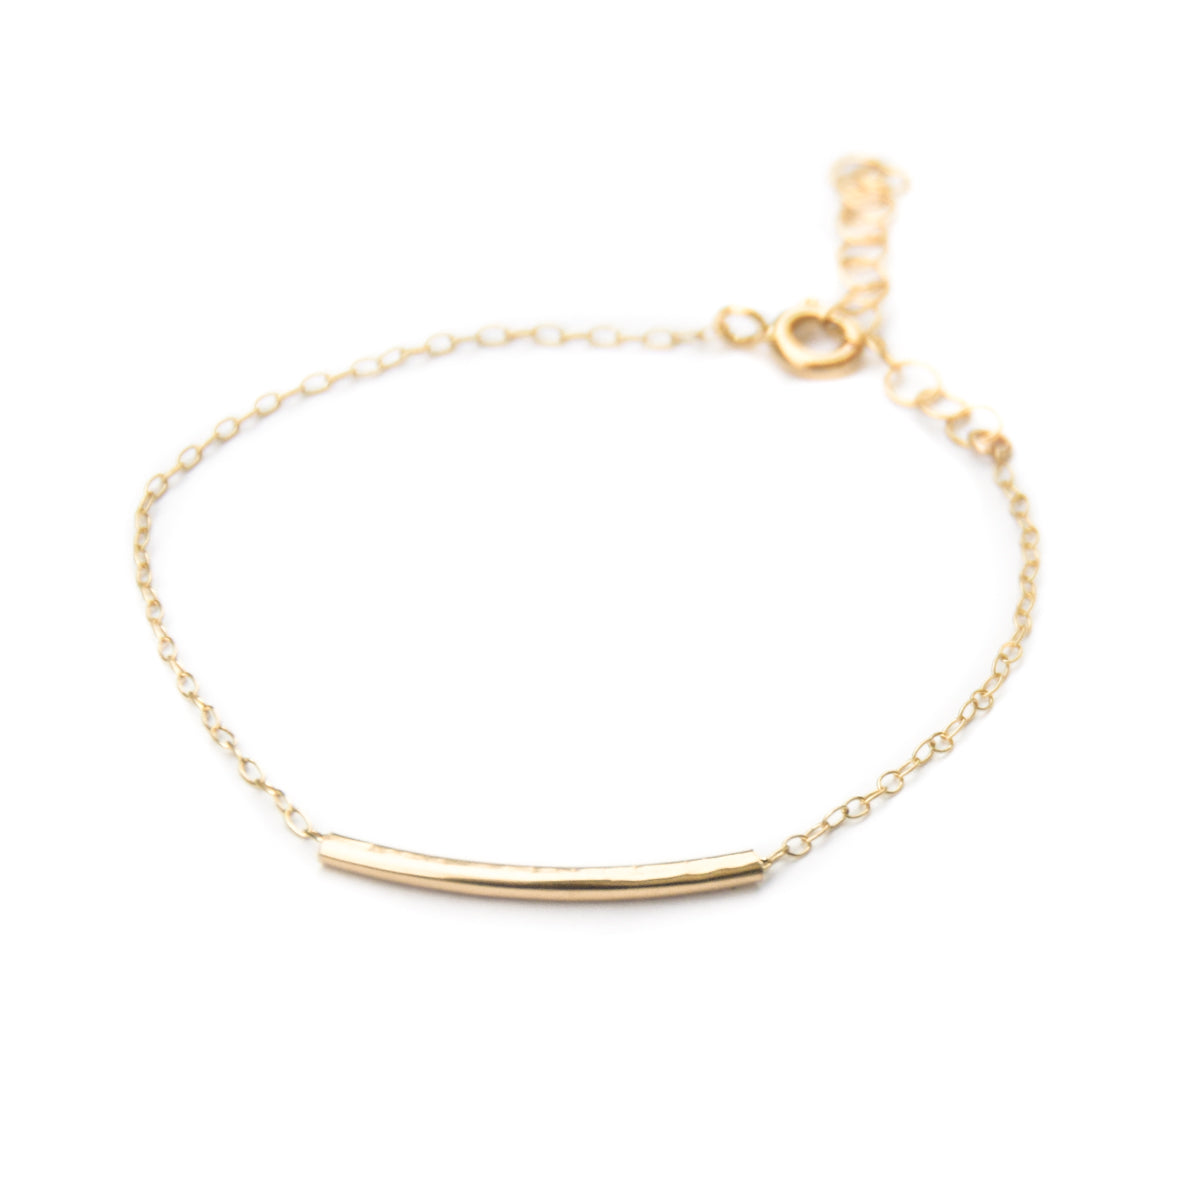 Space Tunnel Bracelet - Gold on Gold